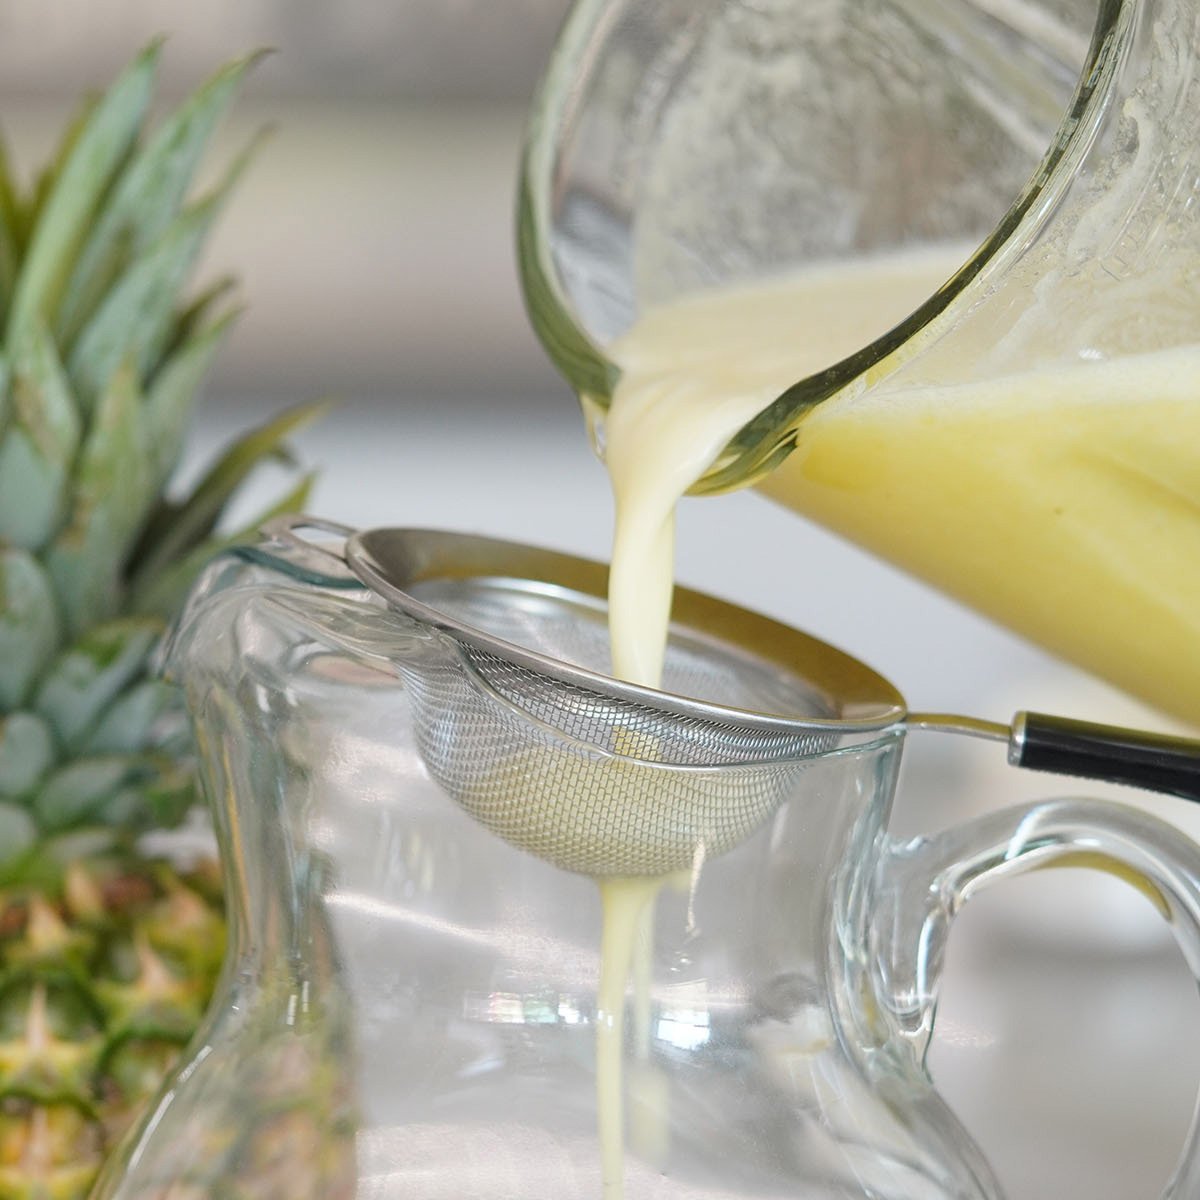 Pouring the pineapple water thru a small strainer into a jar.